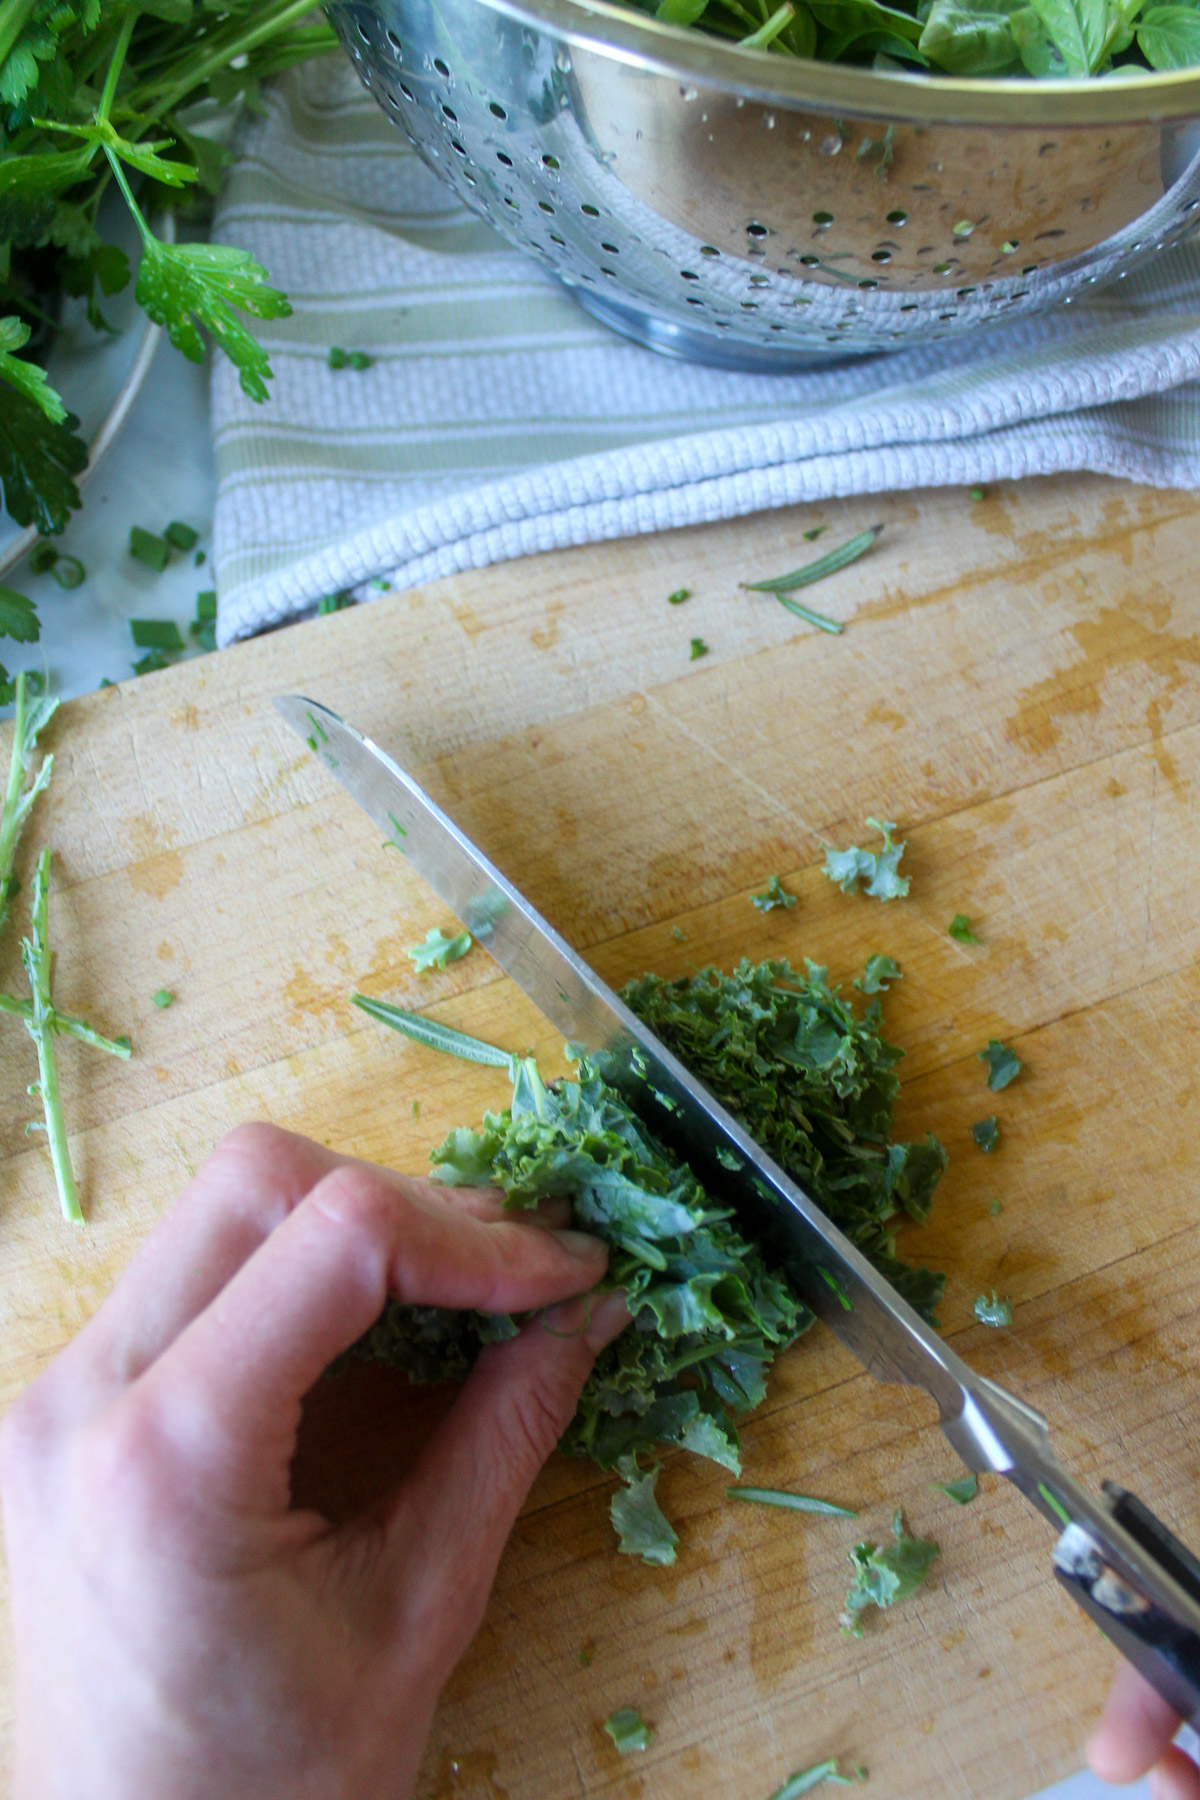 Wad up kale and other herb leaves into tight bundles before running your knife through them.